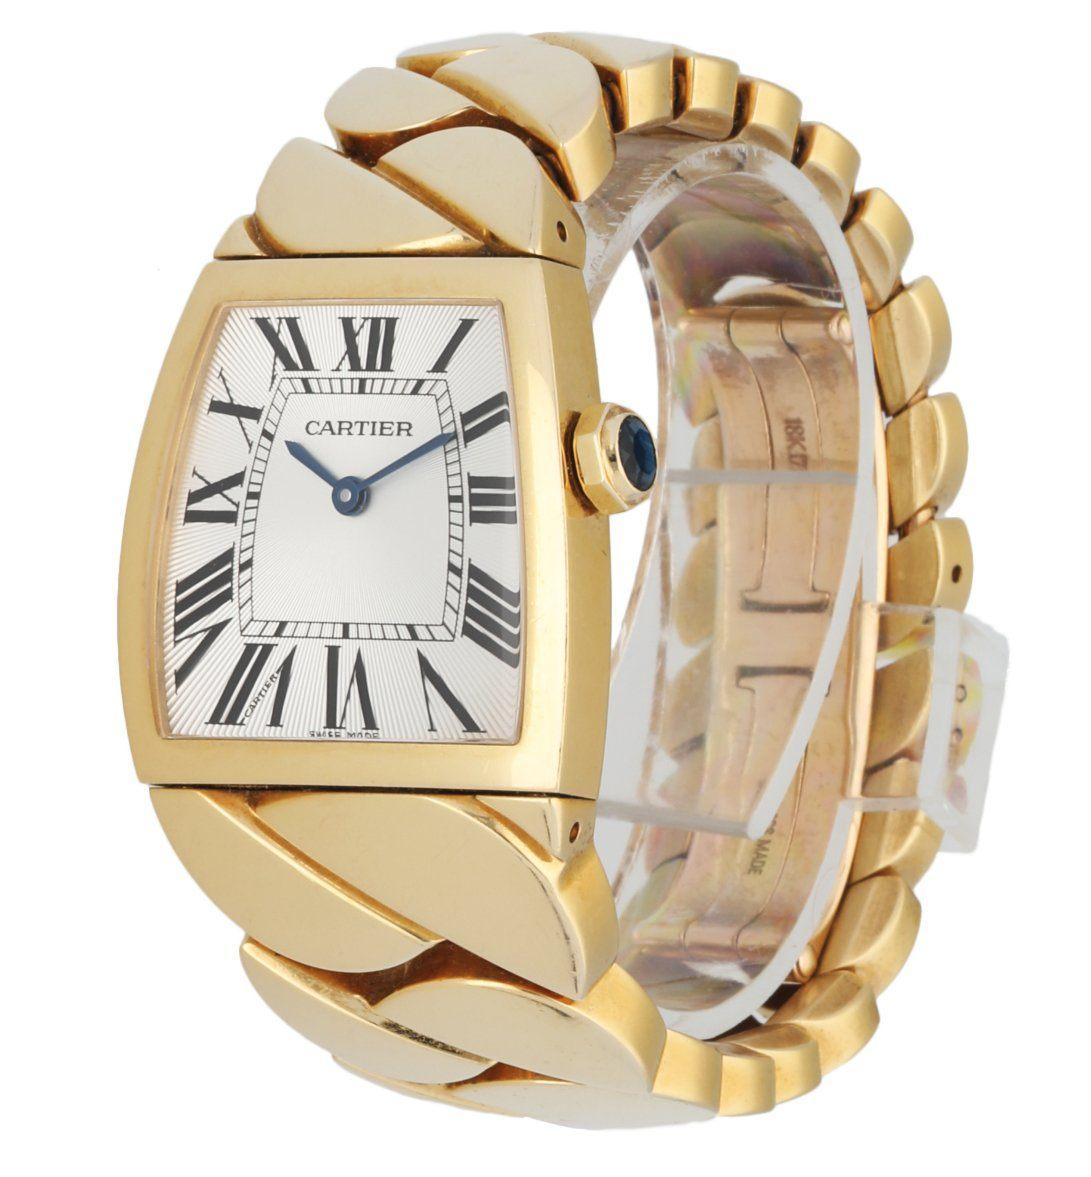 Cartier La Dona 2836 Ladies Watch. 28mm (at the widest point) 18K yellow gold case withÂ 18K yellow gold bezel.Â Silver dial with blue steel hands andÂ Roman numeral hour markers. Minute markers on the inner dial. 18K yellow gold bracelet withÂ 18K